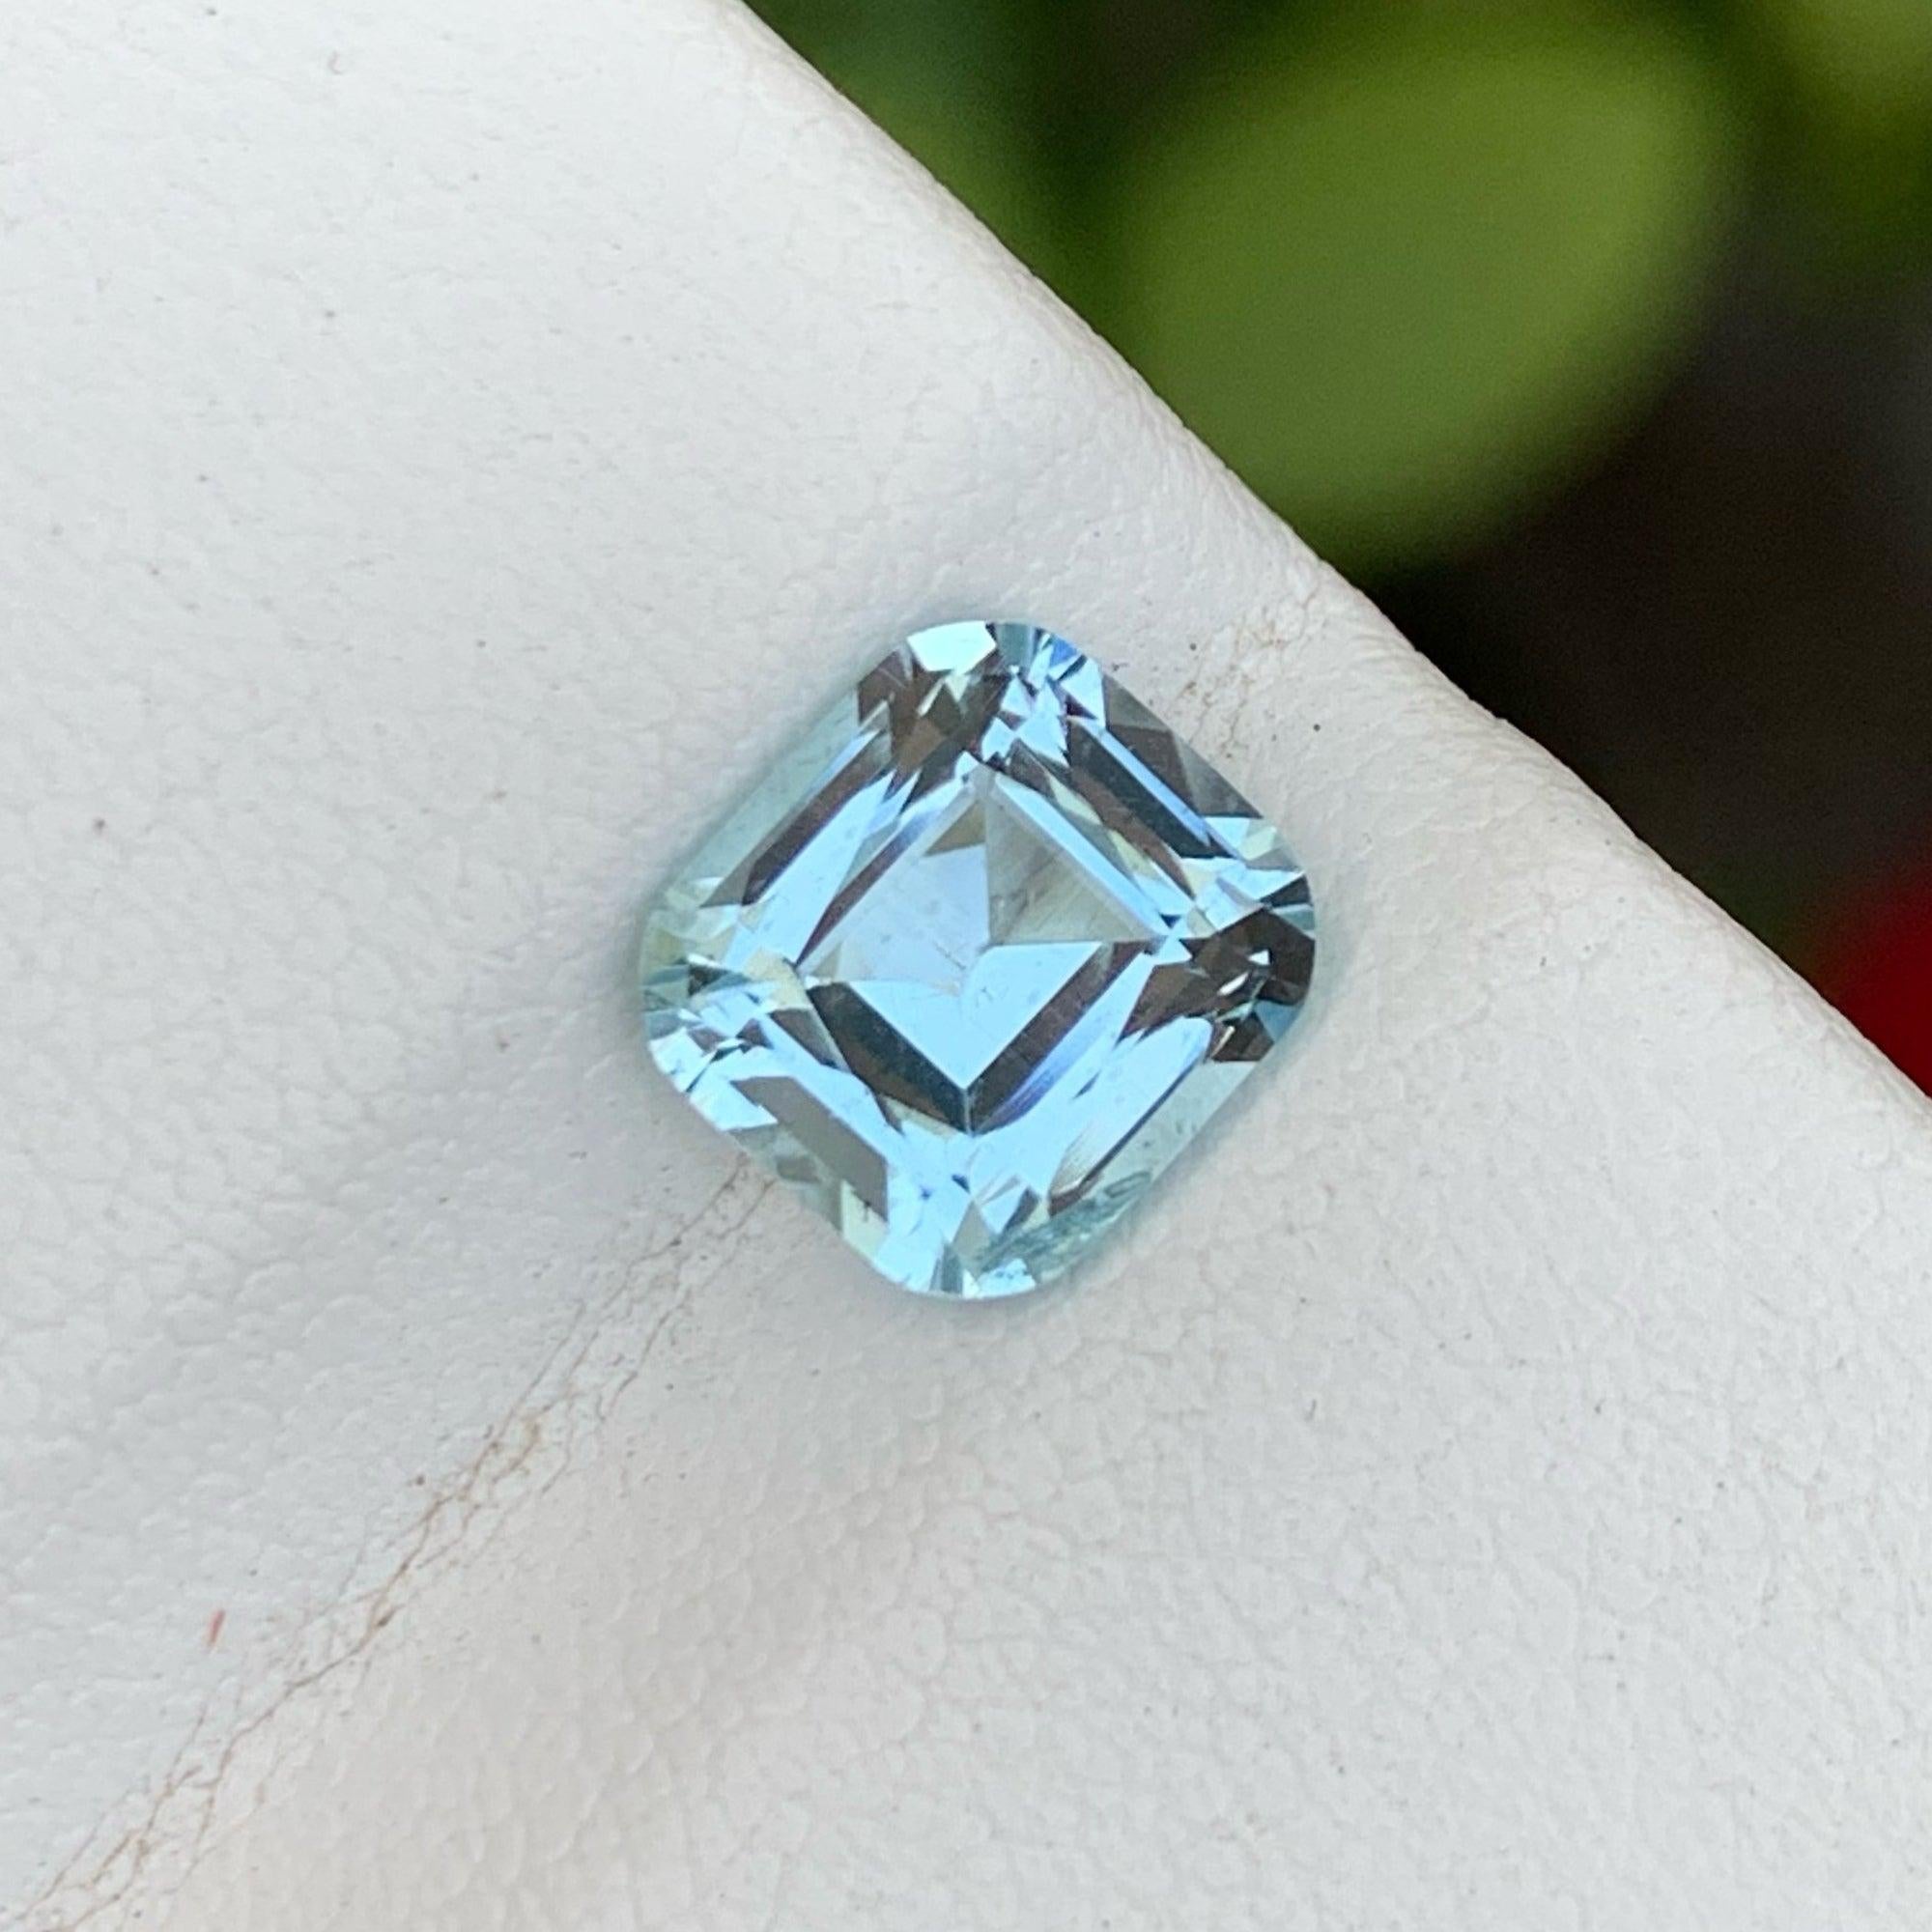 Modern Excellent Loose Aquamarine 1.70 Carats Loose Gemstones for Ring Jewelry For Sale